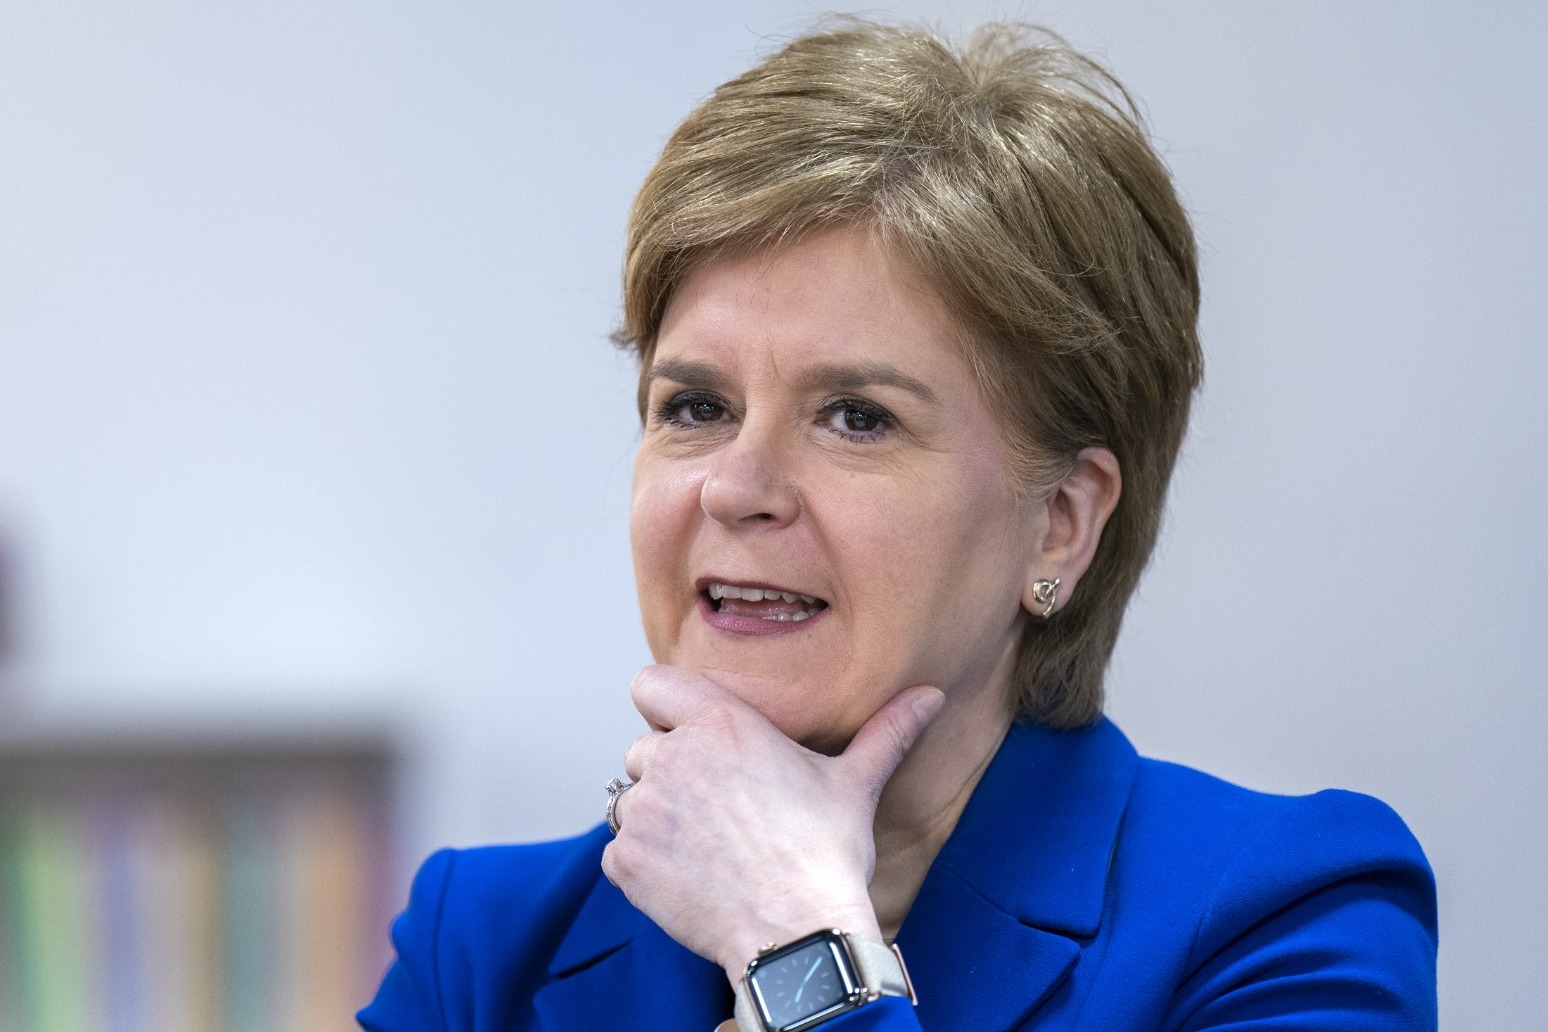 Nicola Sturgeon: I attended memorial service ‘while still having a miscarriage’ 